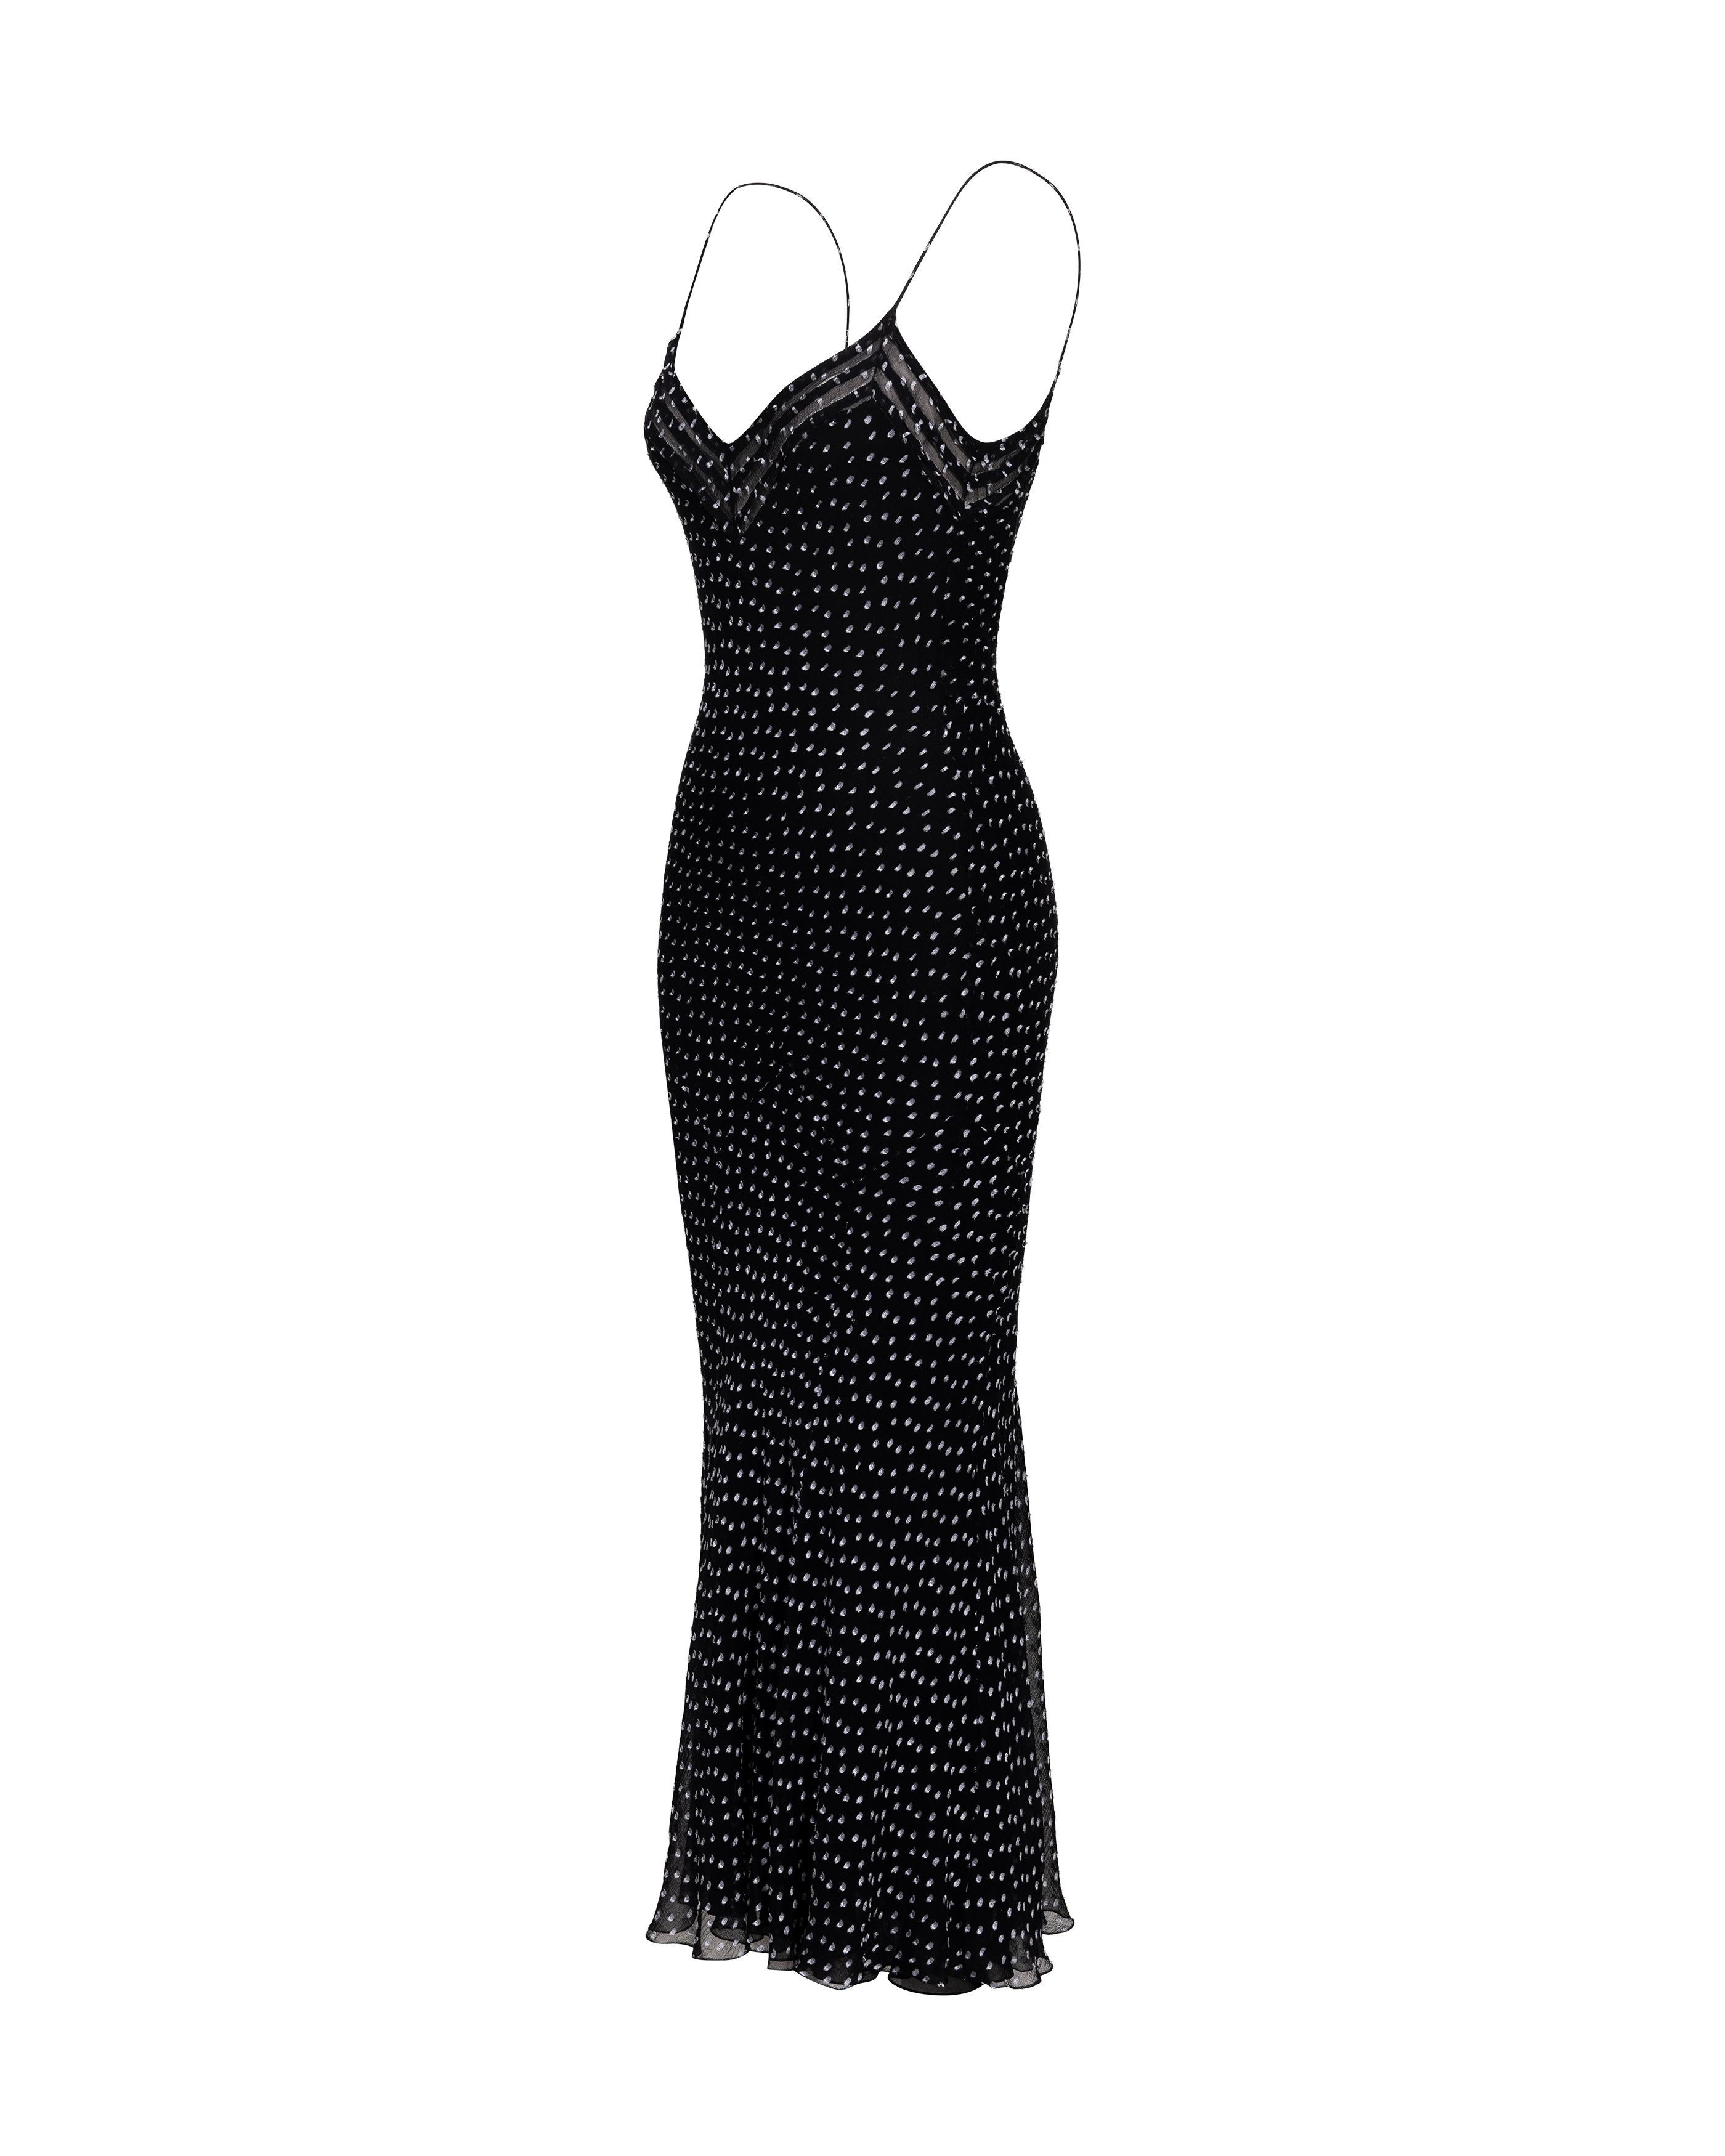 A/W 1999 John Galliano bias cut black and white bias cut polka dot slip gown. Silk chiffon sleeveless spaghetti strap slip midi dress/gown with semi-sheer striped mesh paneling at bust. Fully lined with black silk lining. Pull-over dress with no